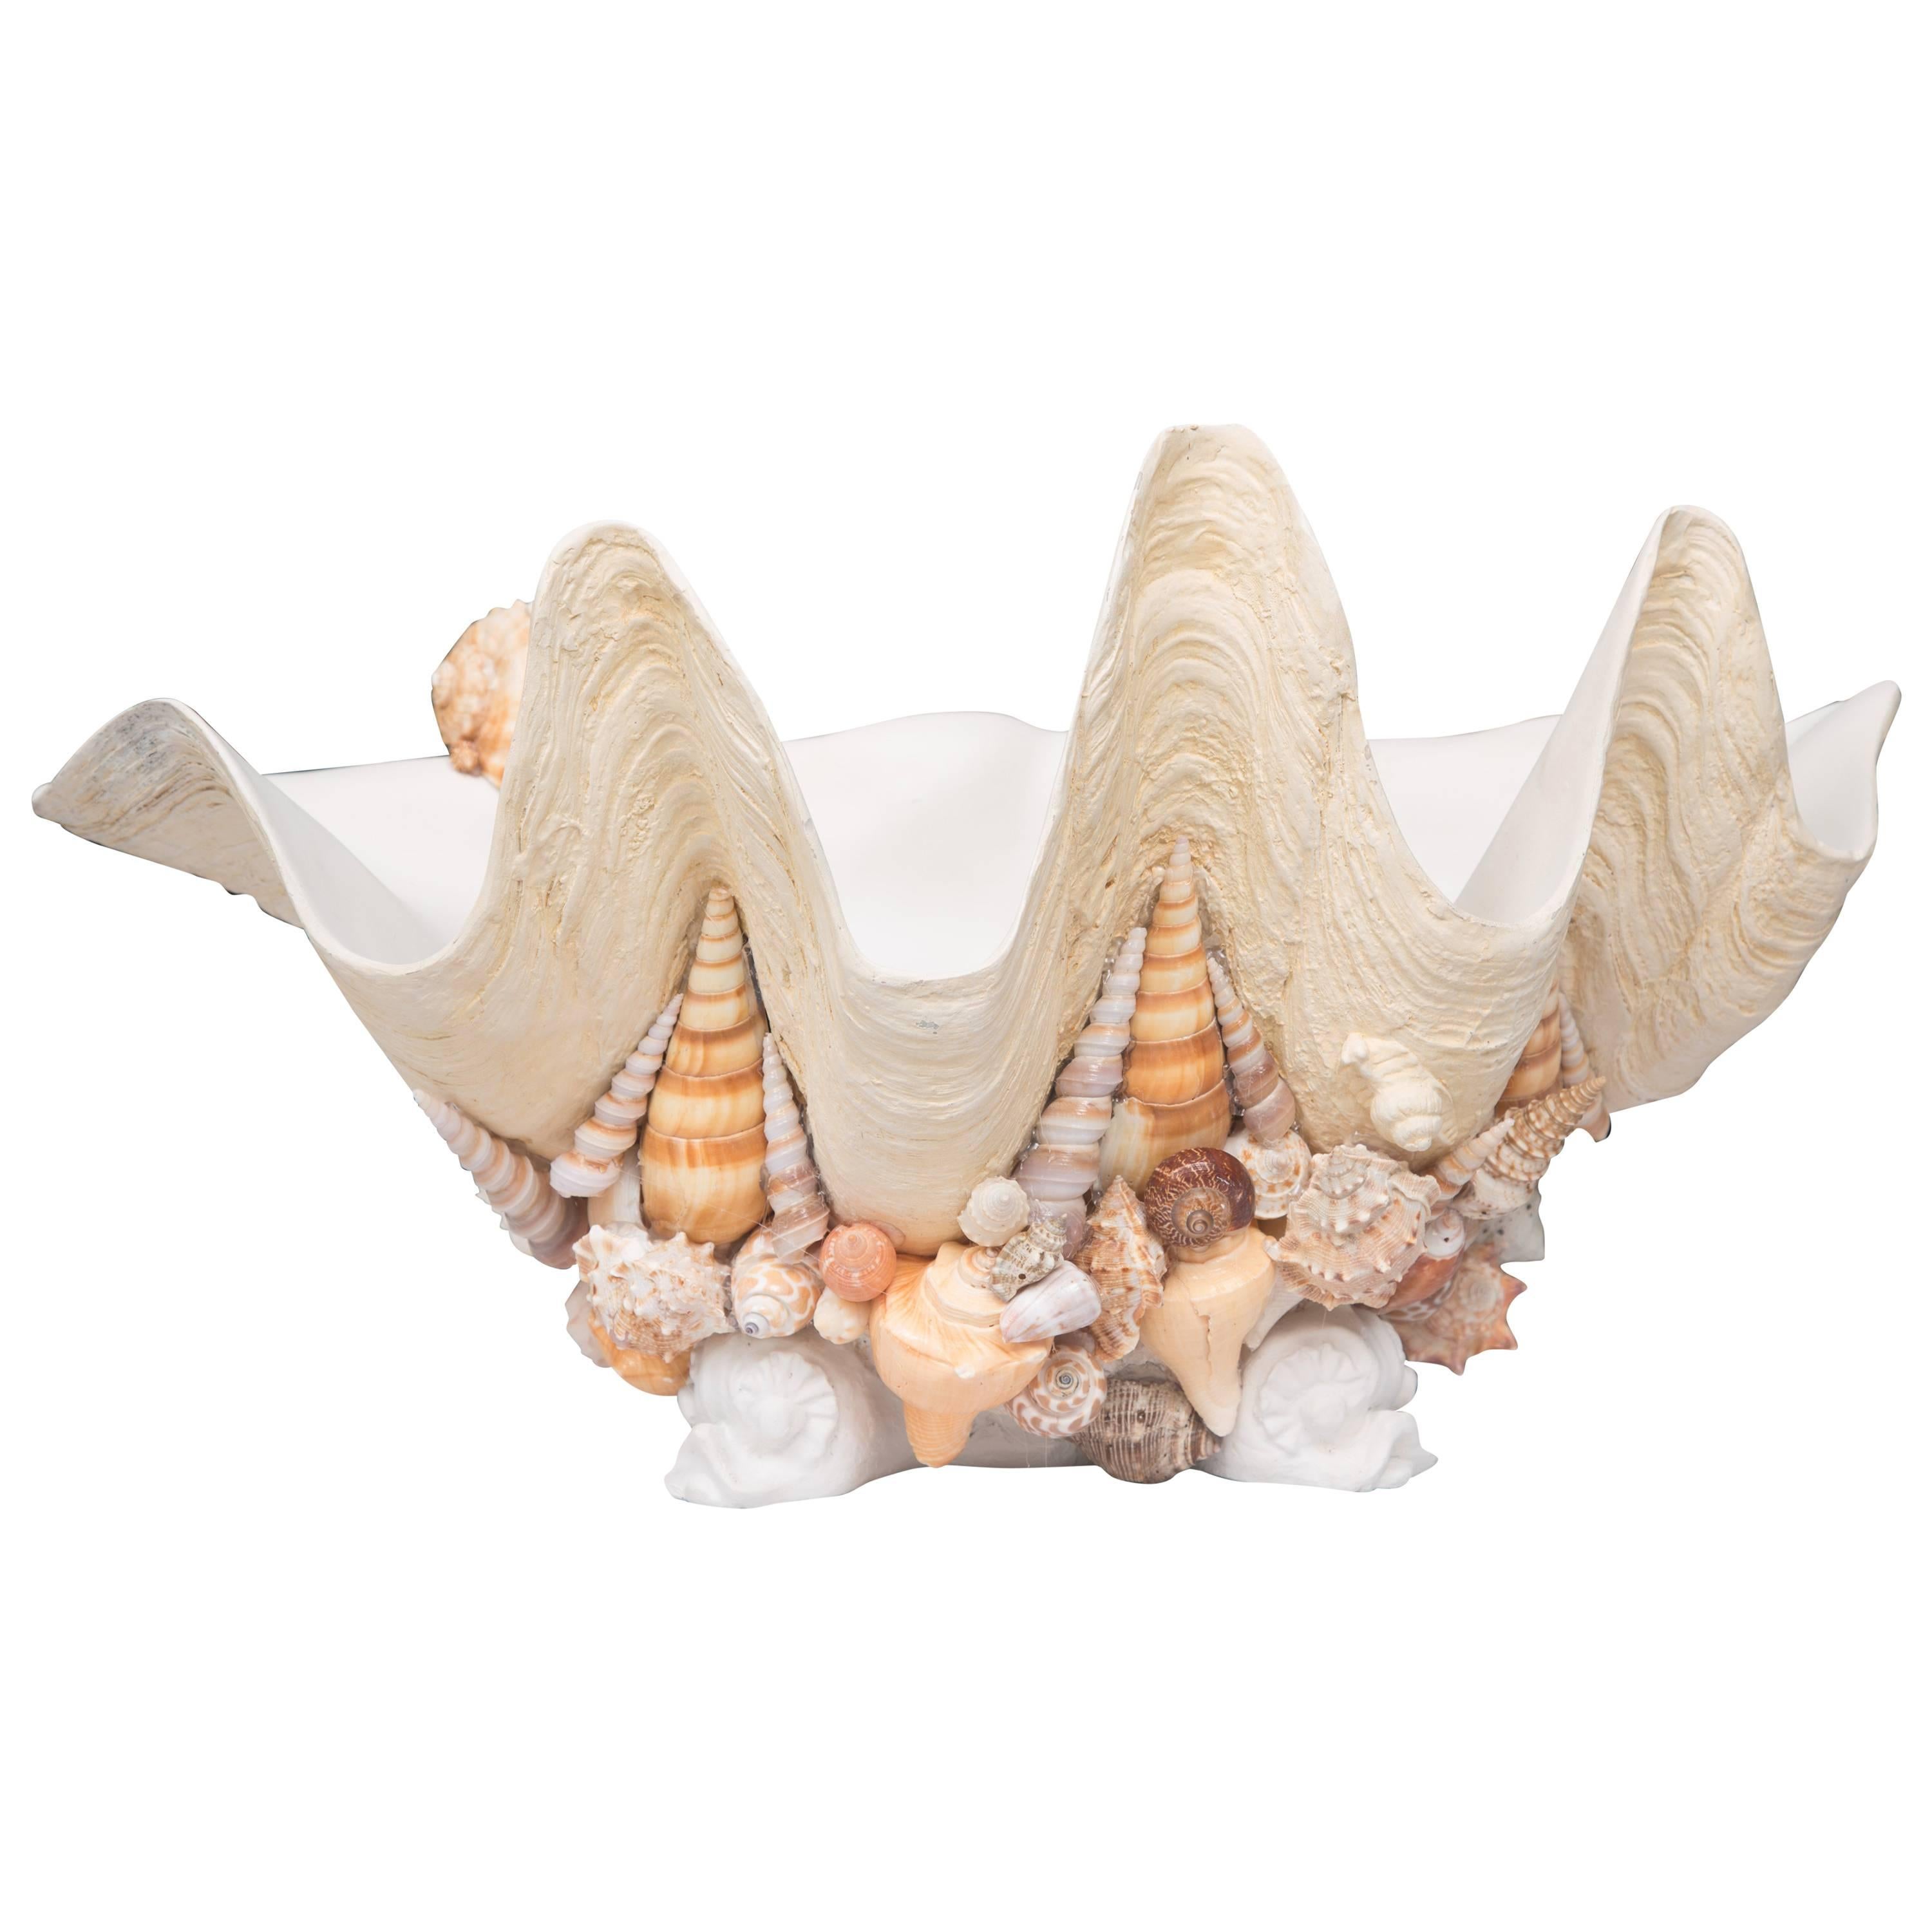 Decorative Shell Encrusted Composition Clam Shell with Natural Sea Shells